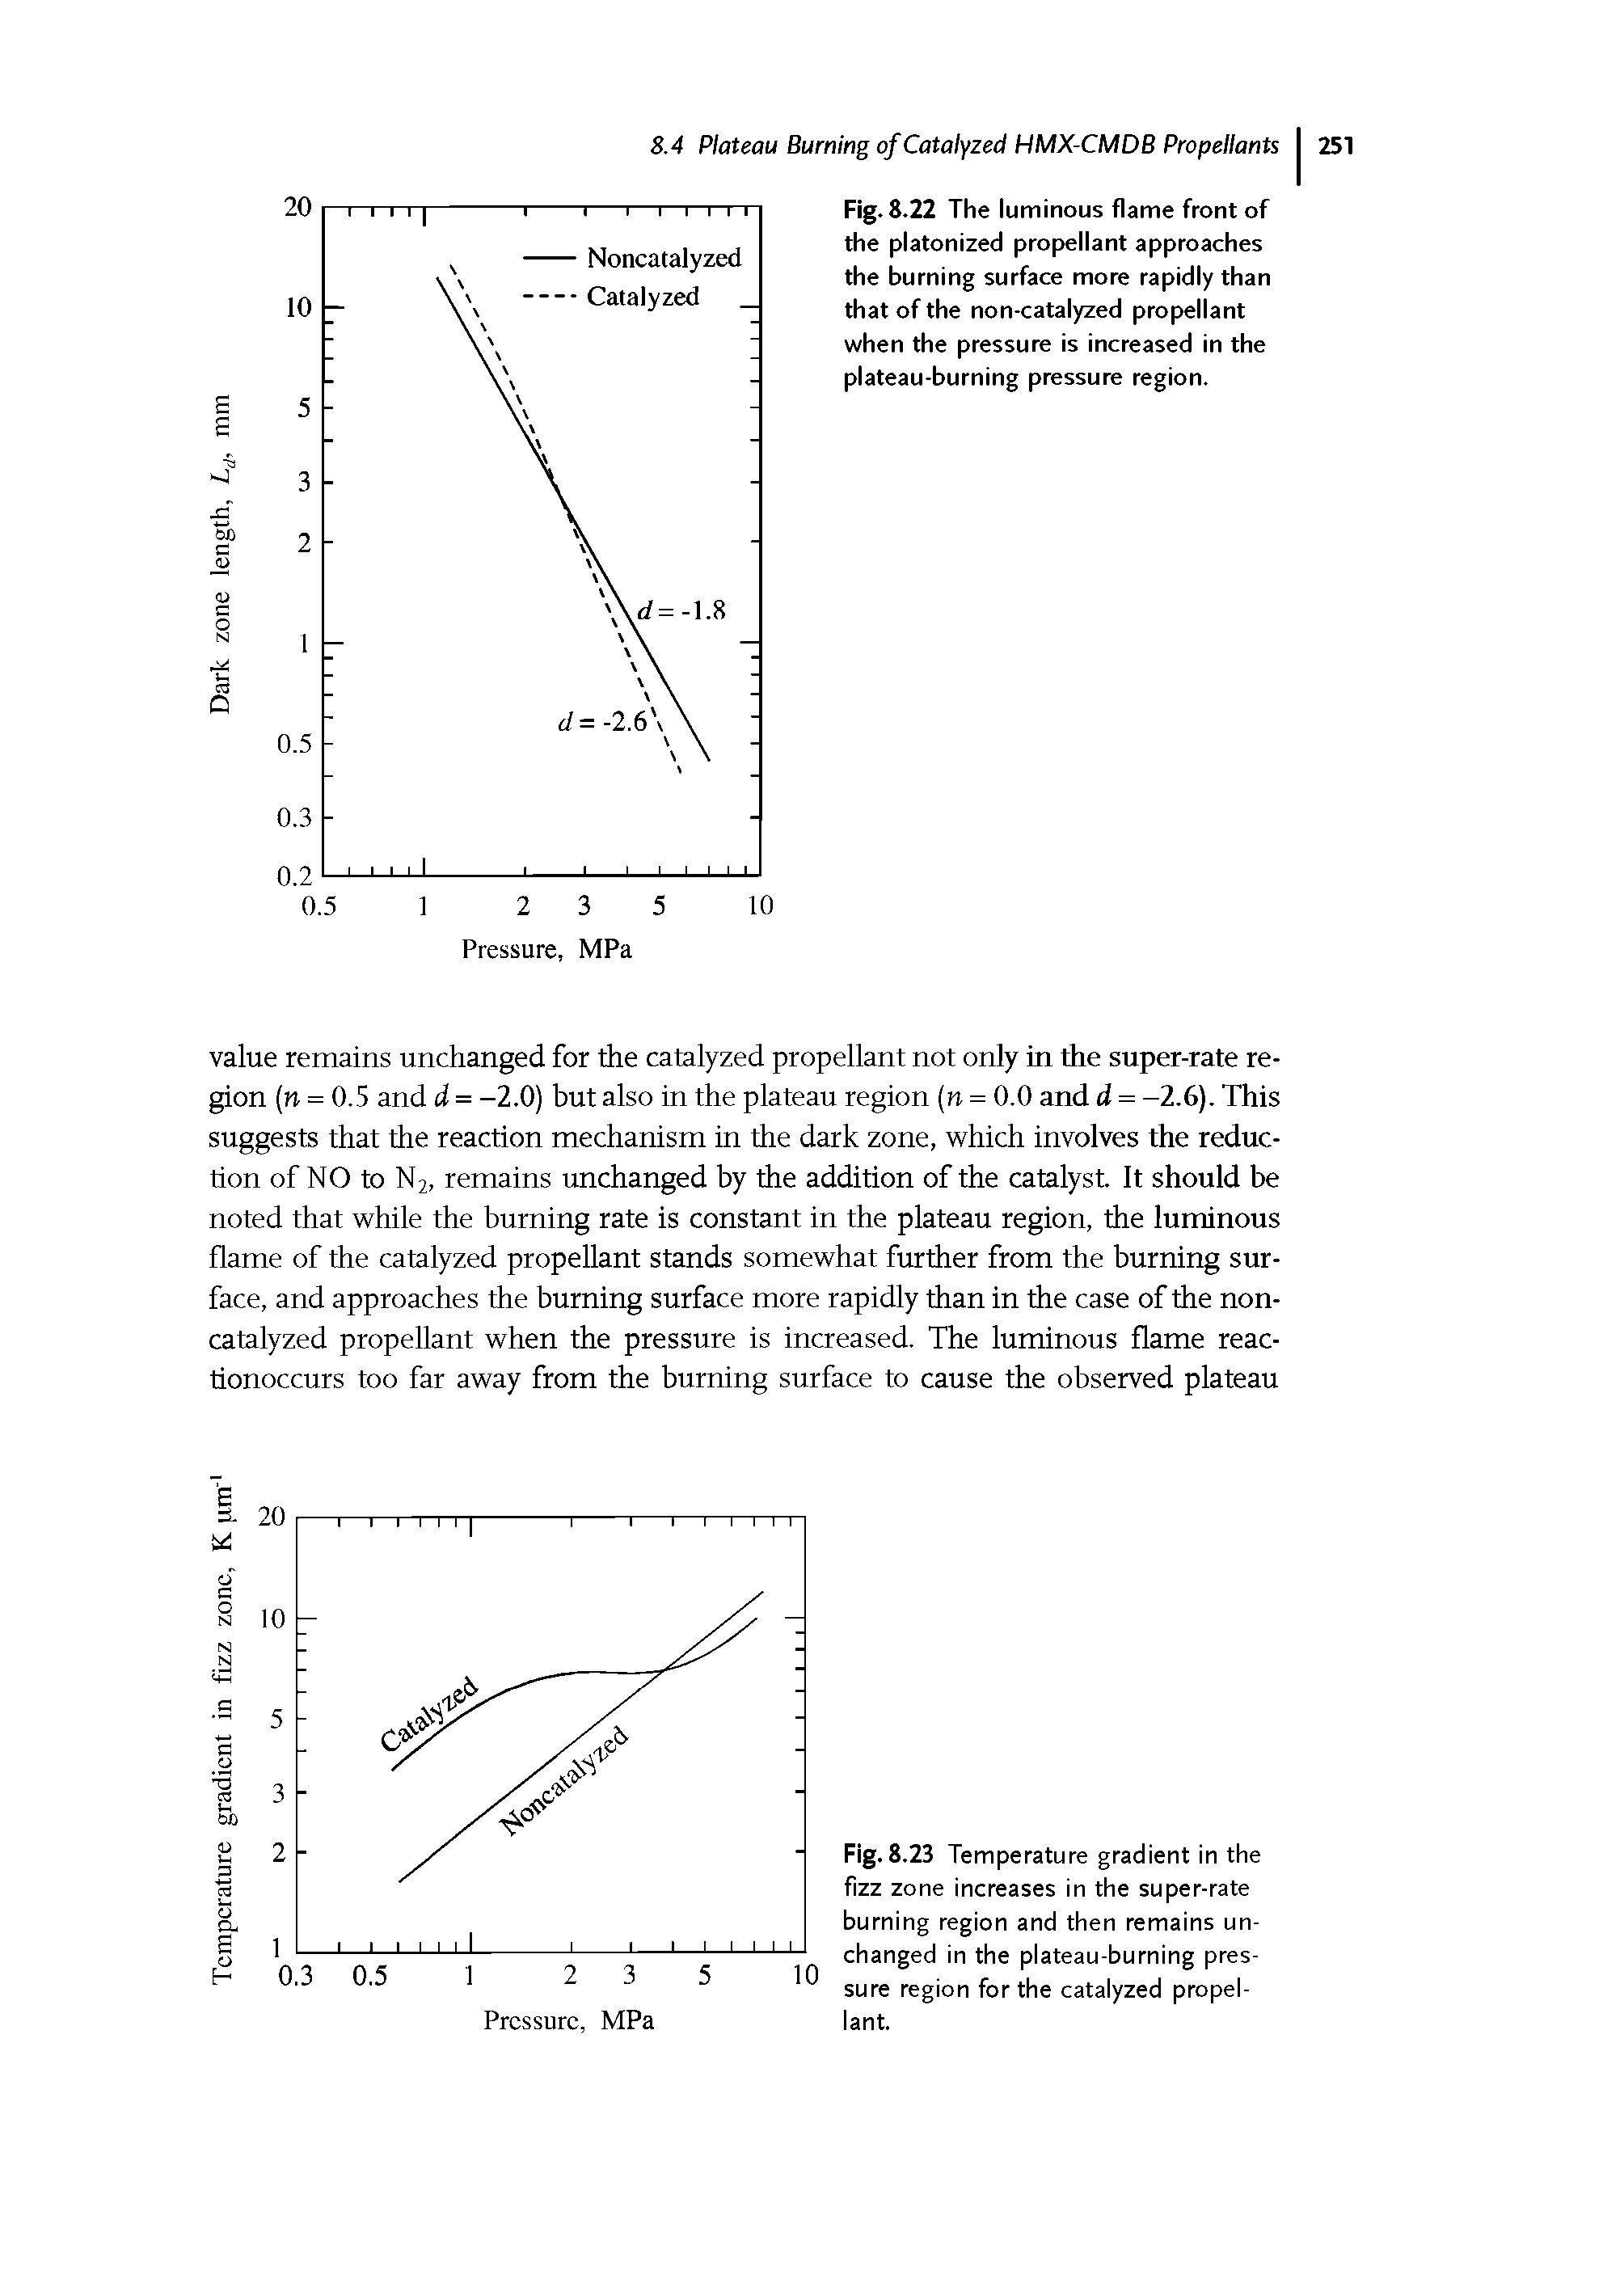 Fig. 8.22 The luminous flame front of the platonized propellant approaches the burning surface more rapidly than that of the non-catalyzed propellant when the pressure is increased in the plateau-burning pressure region.